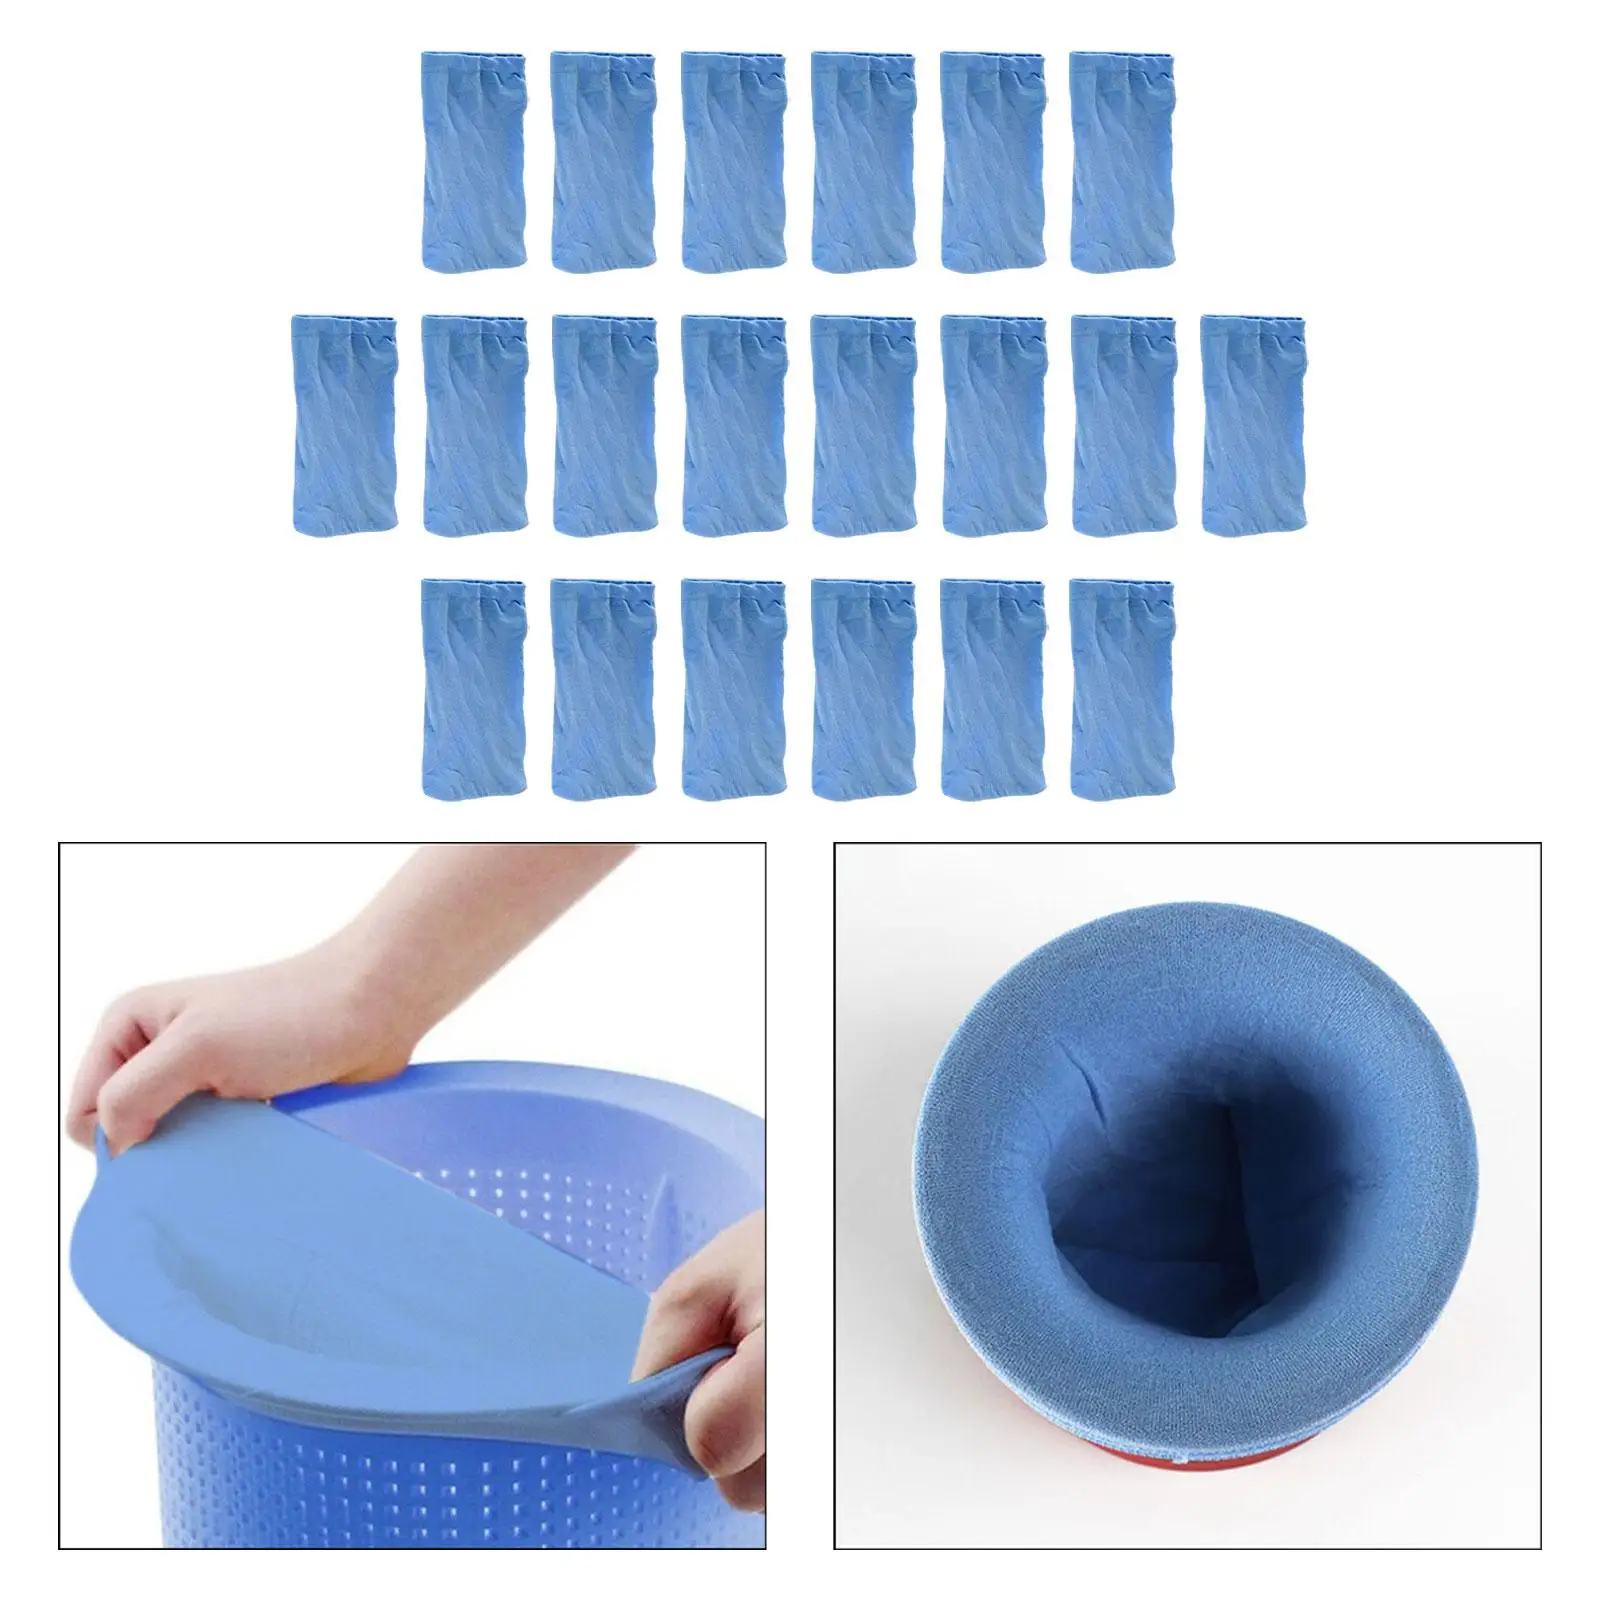 20Pcs Storage Pool Skimmer Socks Replacement Skimmer Basket for Baskets Basket Swimming Pool in Ground and above Ground Pools